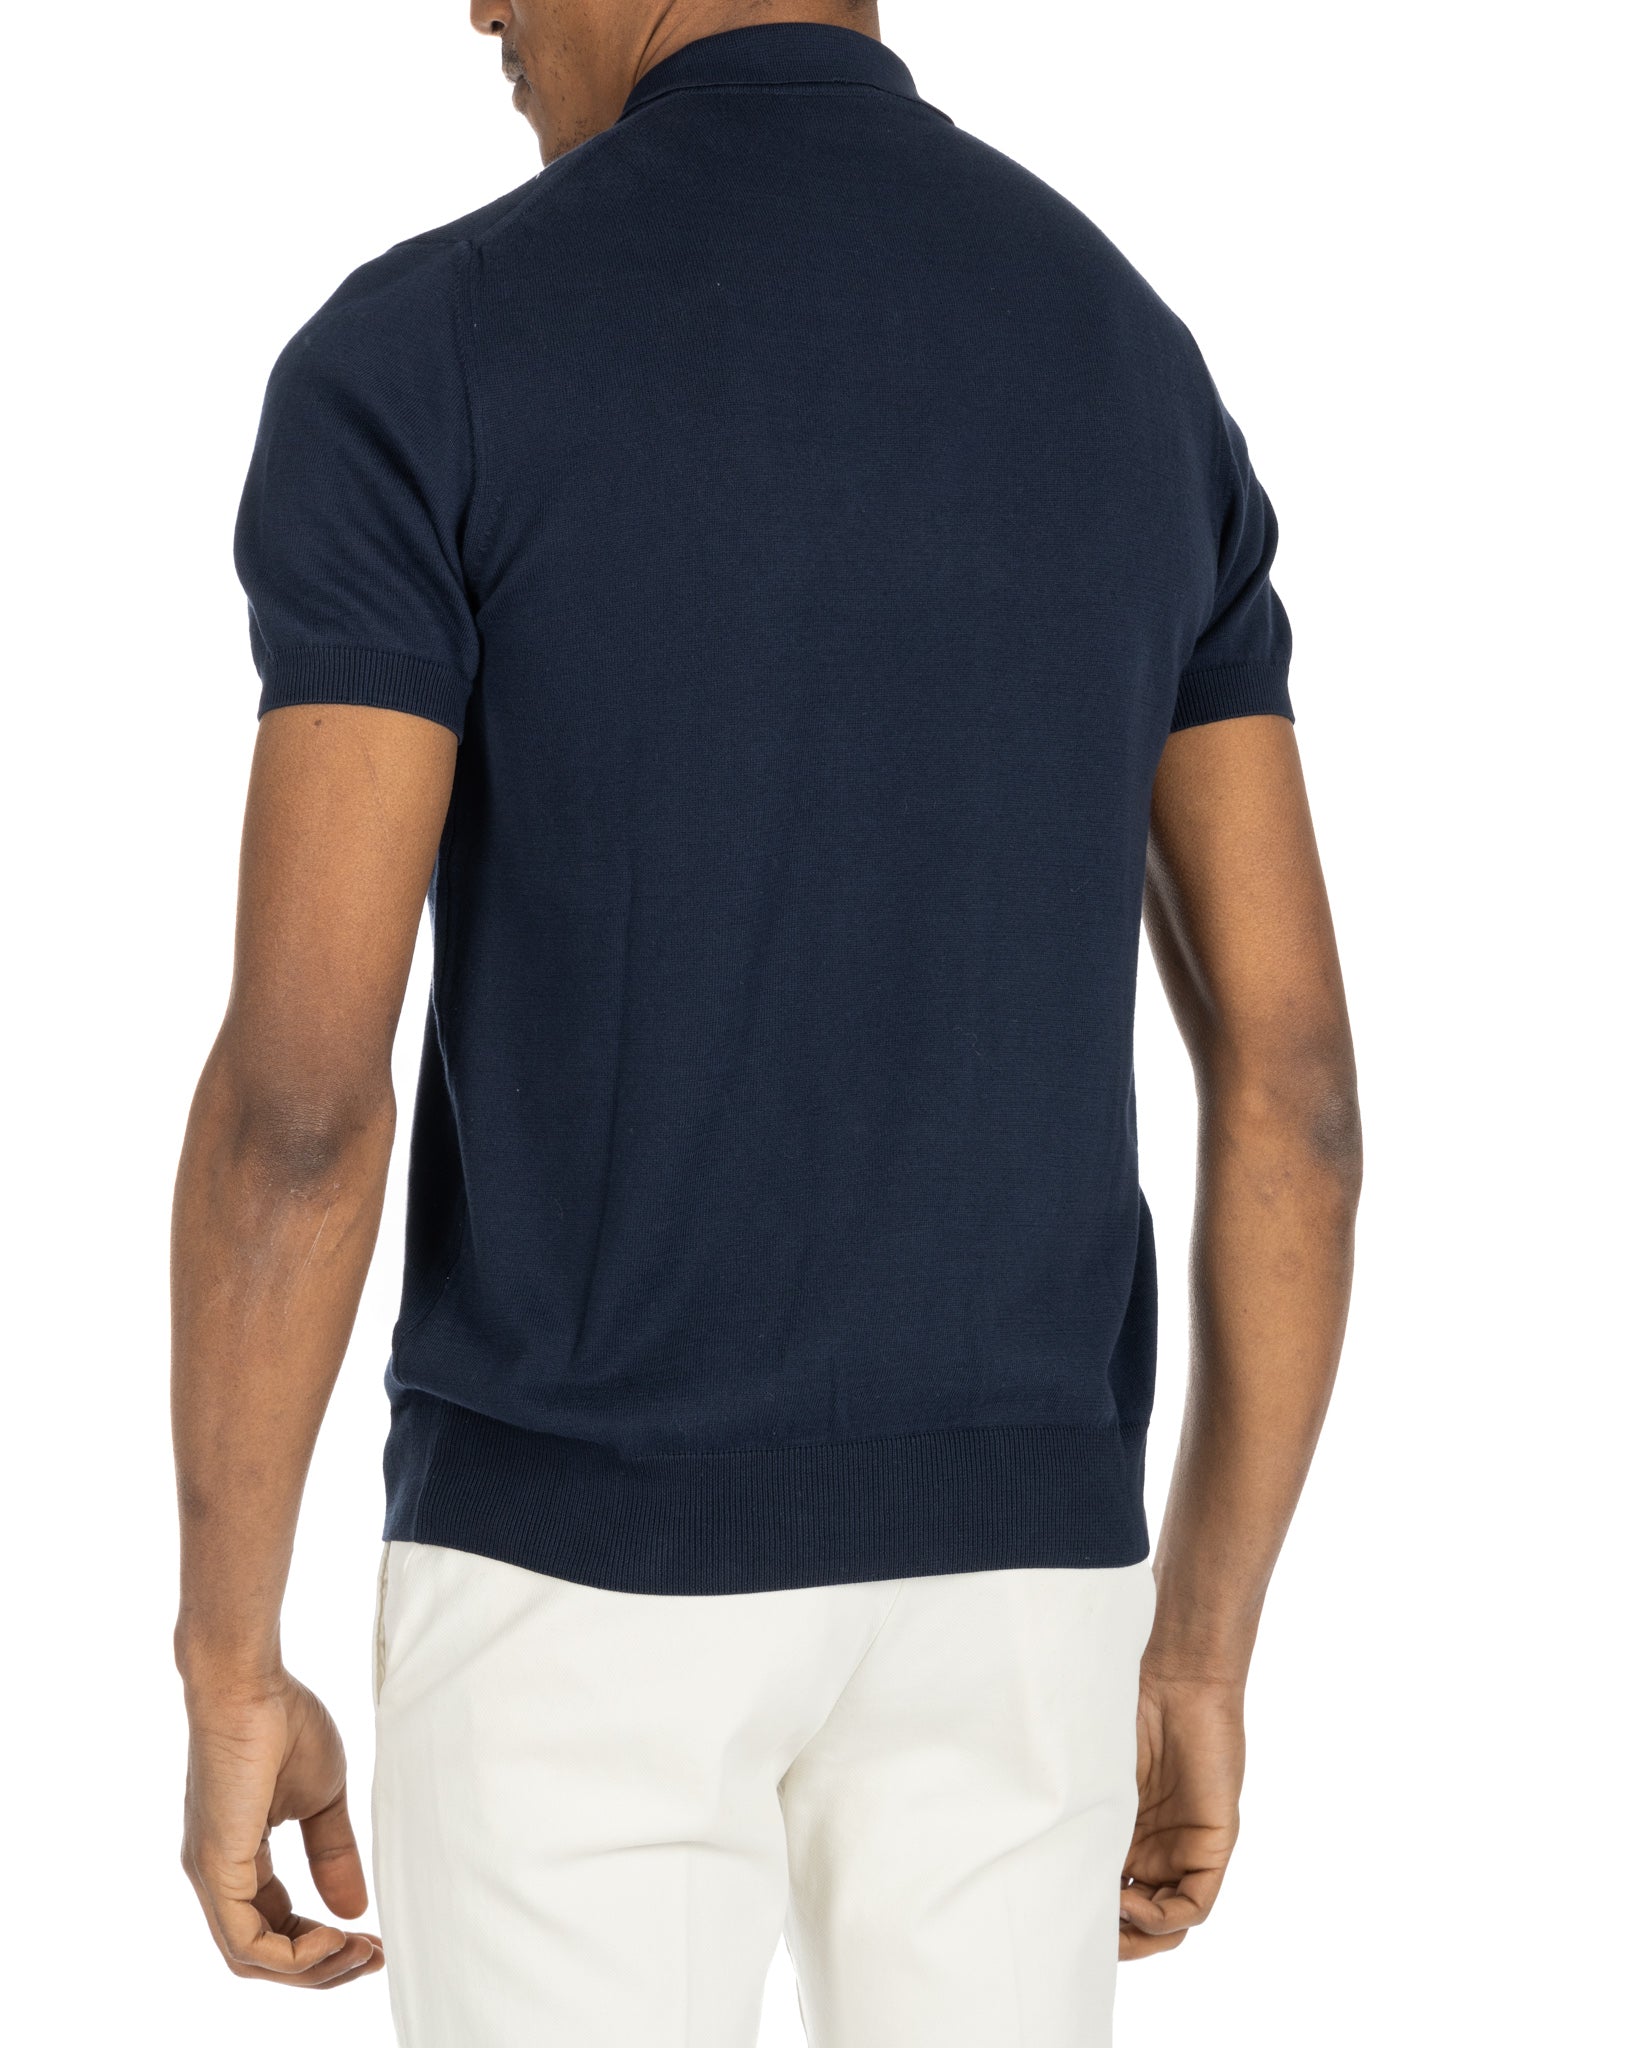 Roger - blue knit polo